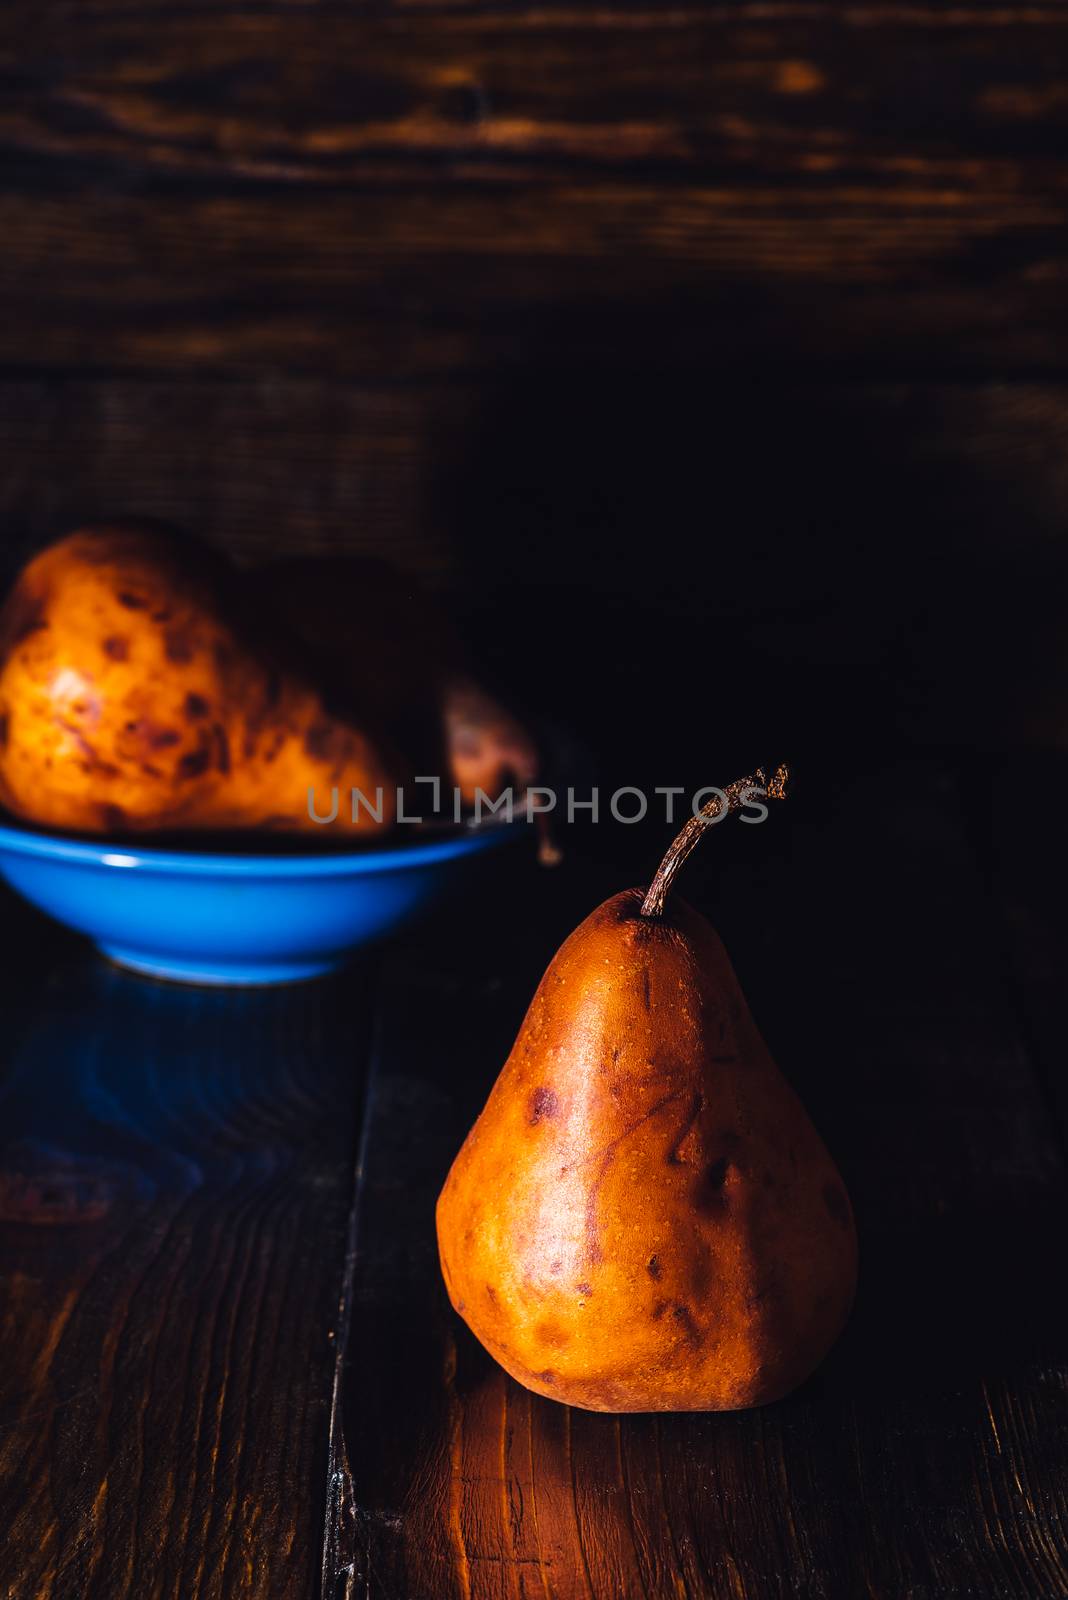 Golden Pear and Some on Background by Seva_blsv